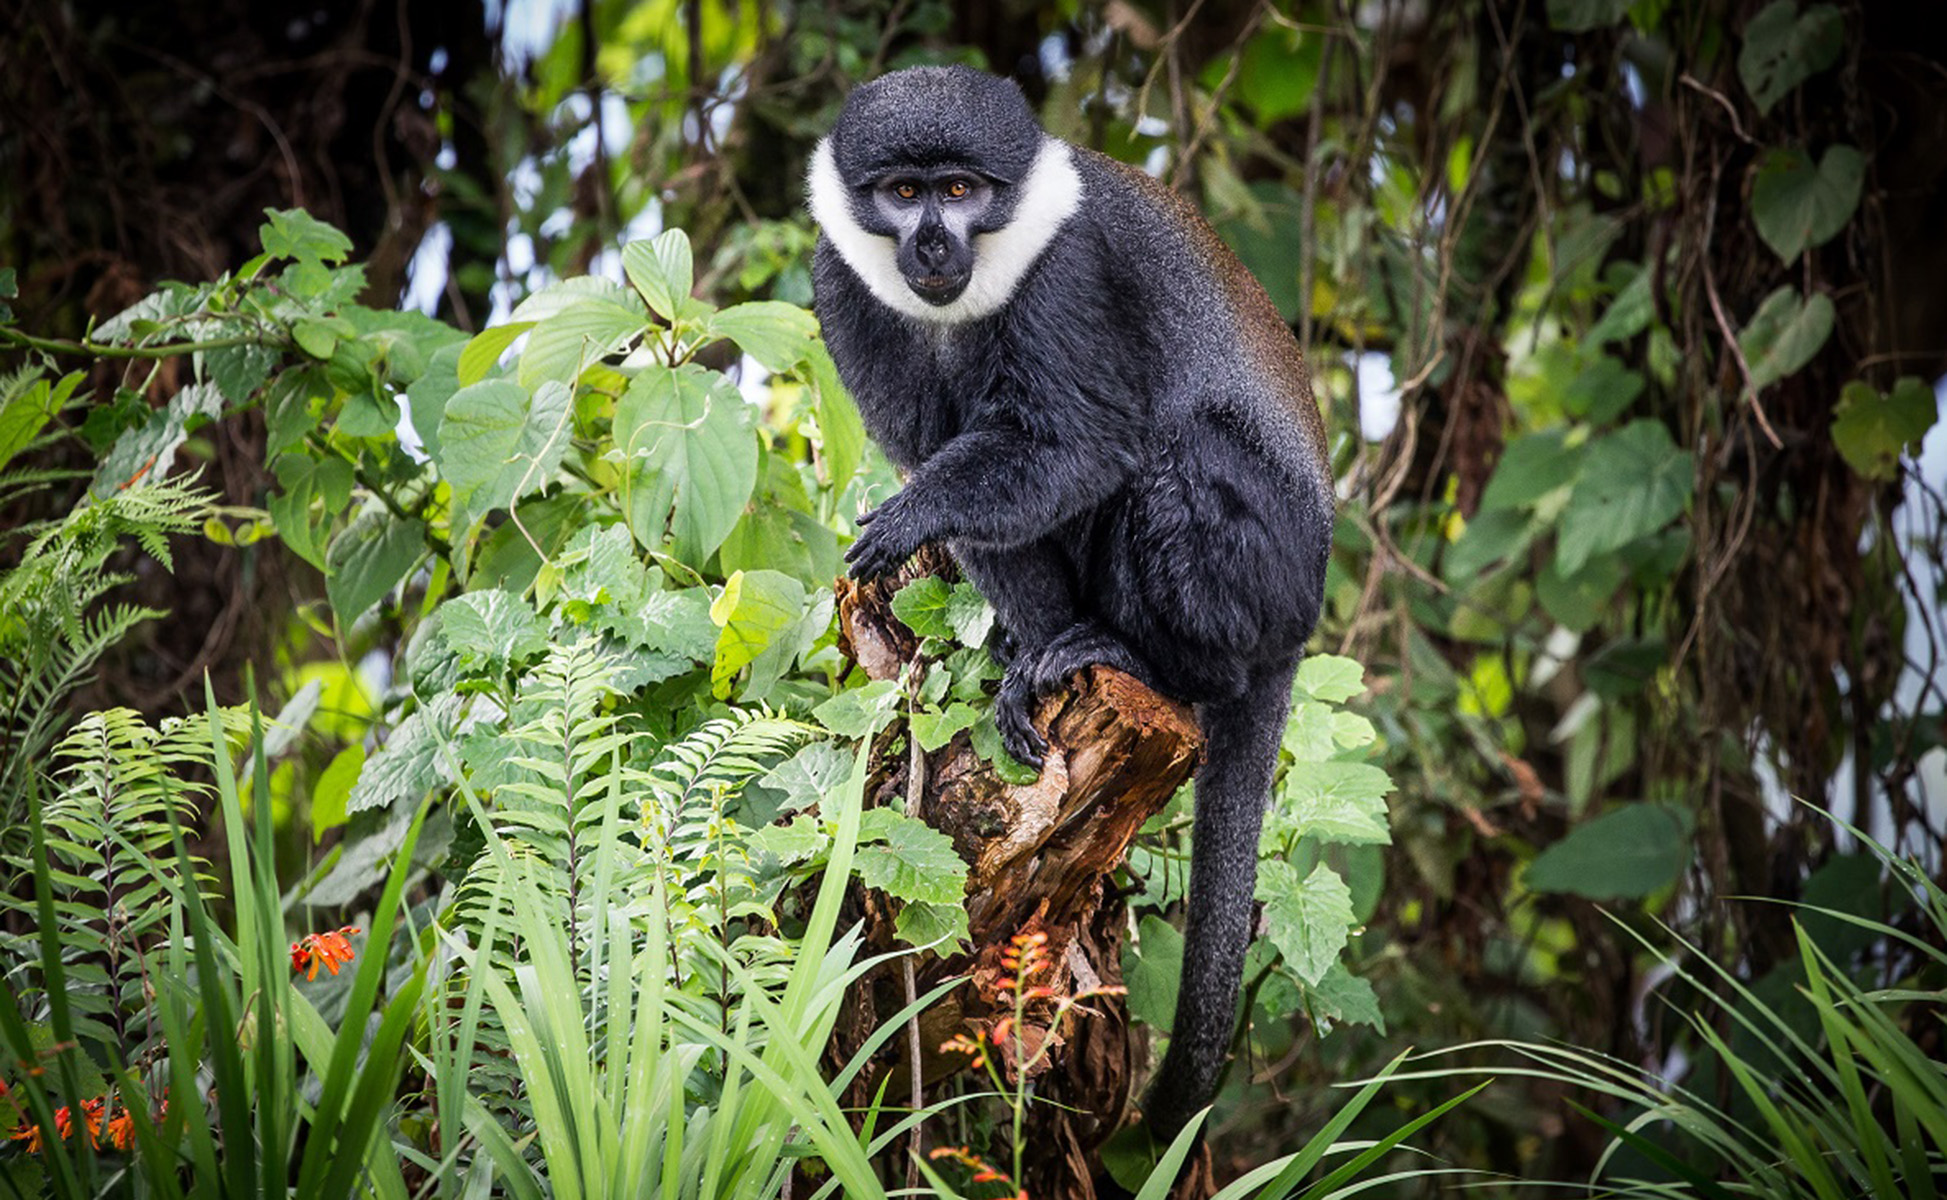  Nyungwe Rainforest, home to a variety of primates including chimpanzees and colobus monkeys.